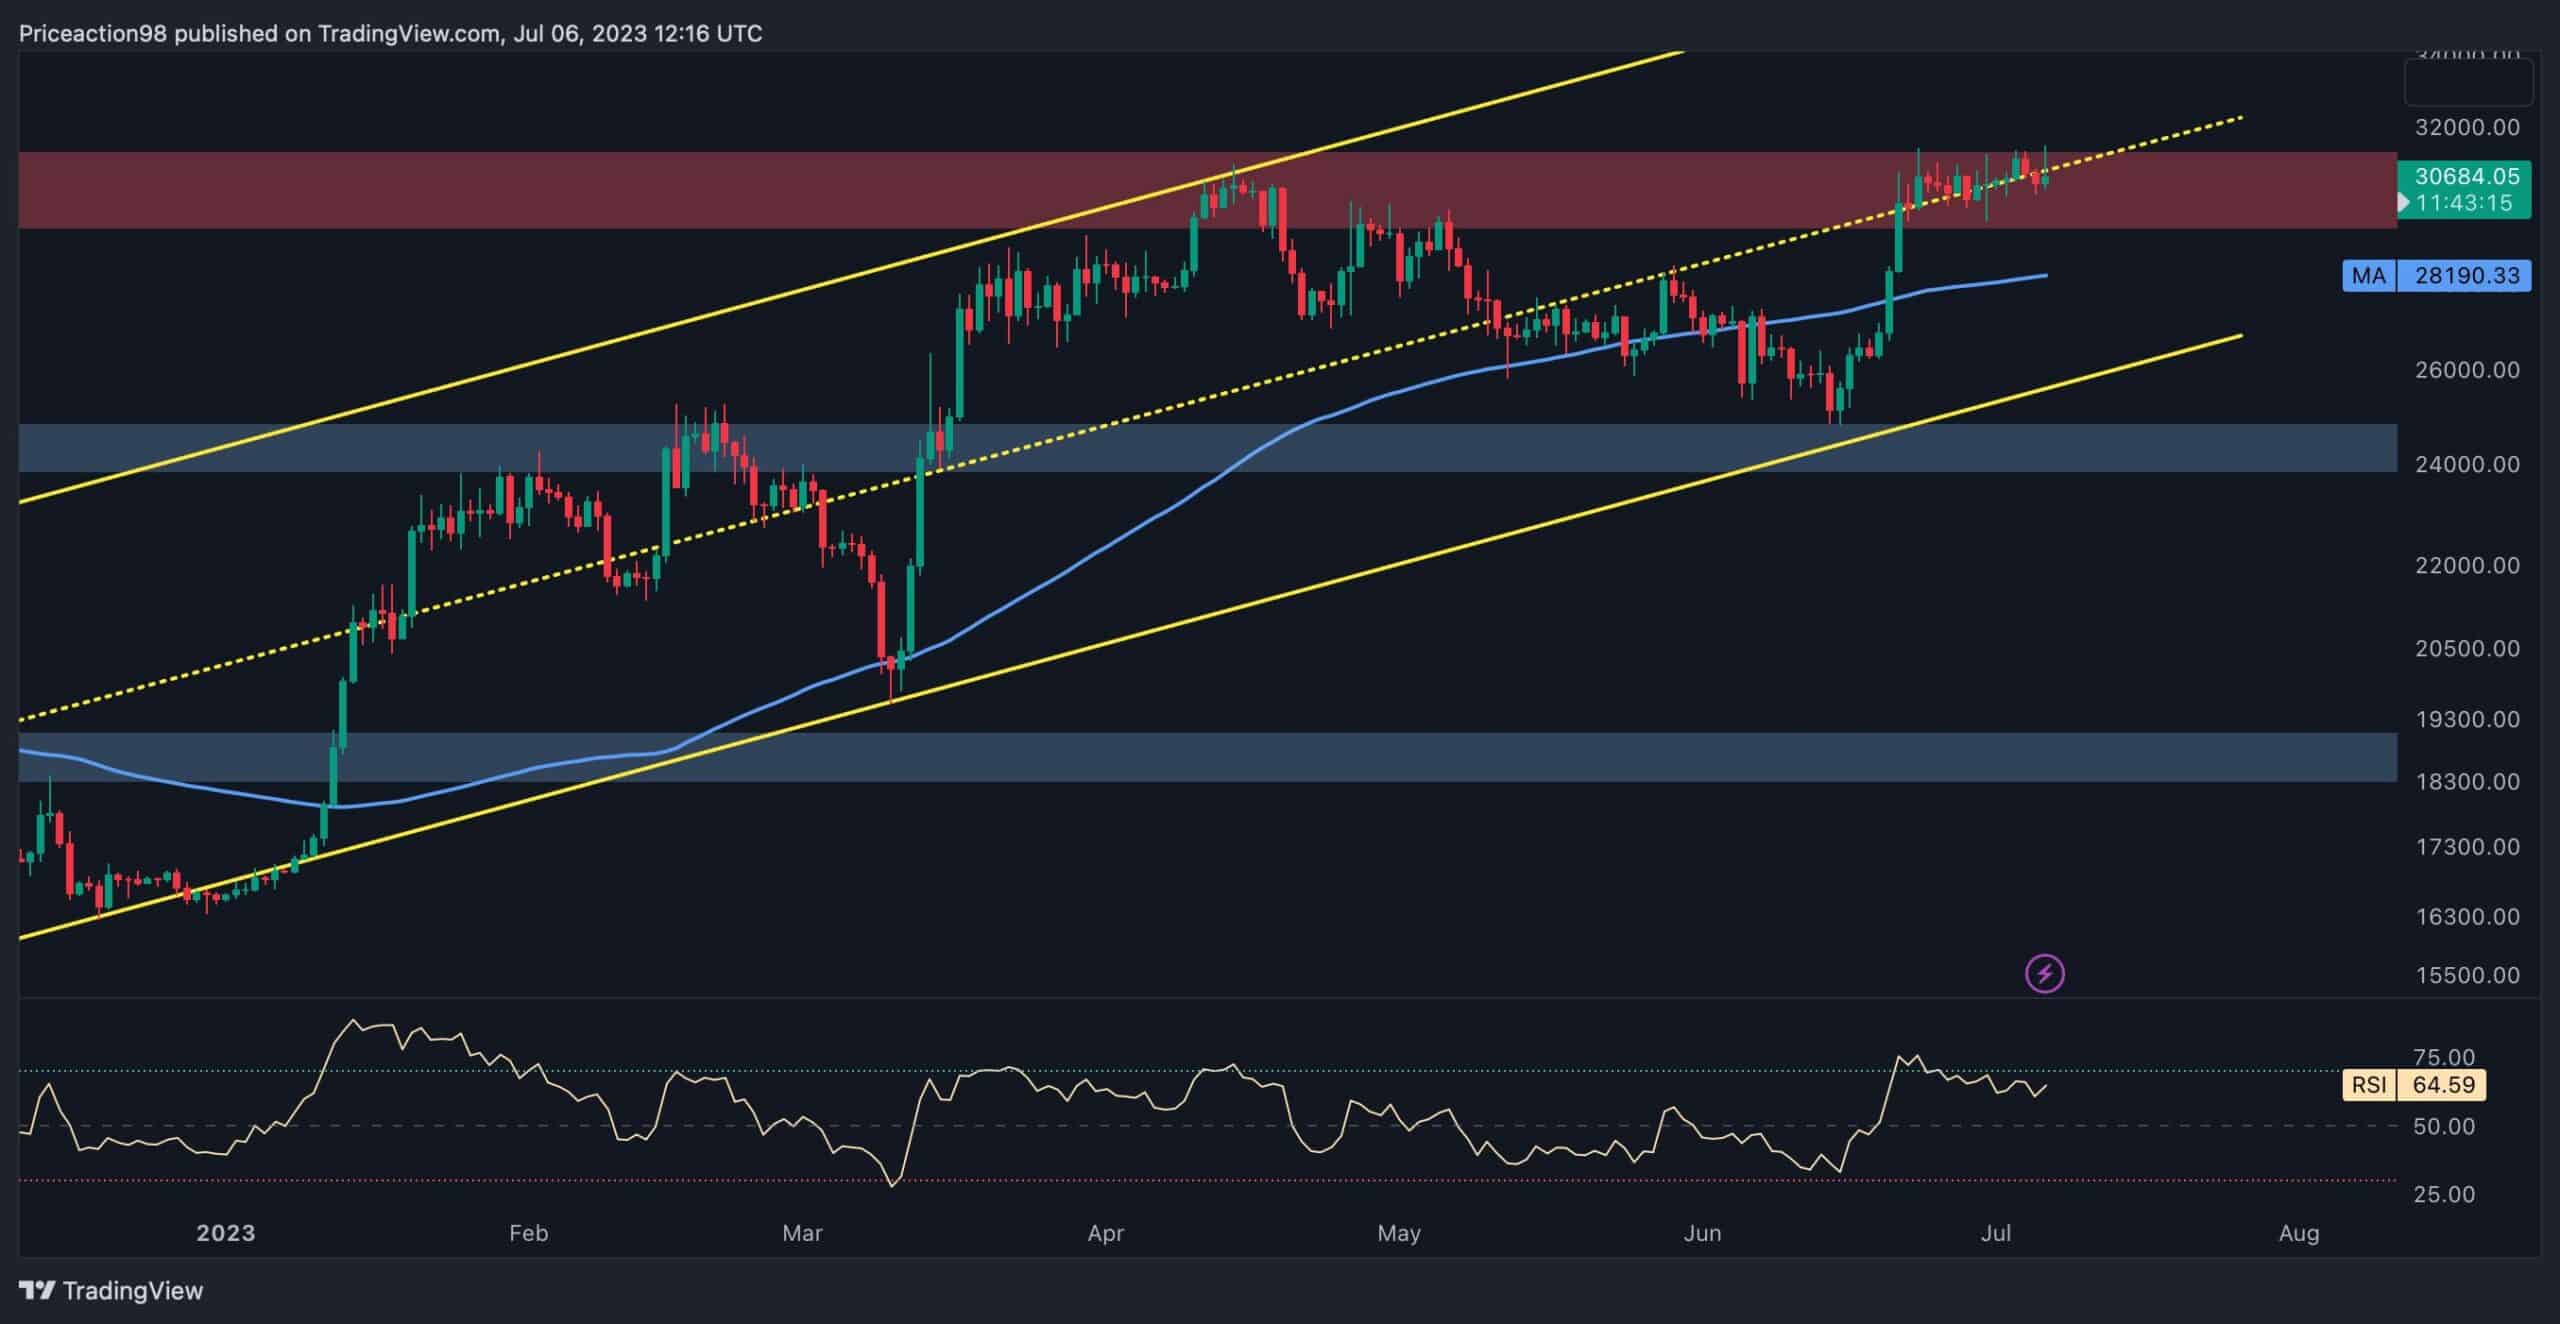 Here’s-the-imminent-support-to-watch-as-bitcoin-tumbles-below-$31k-(btc-price-analysis)